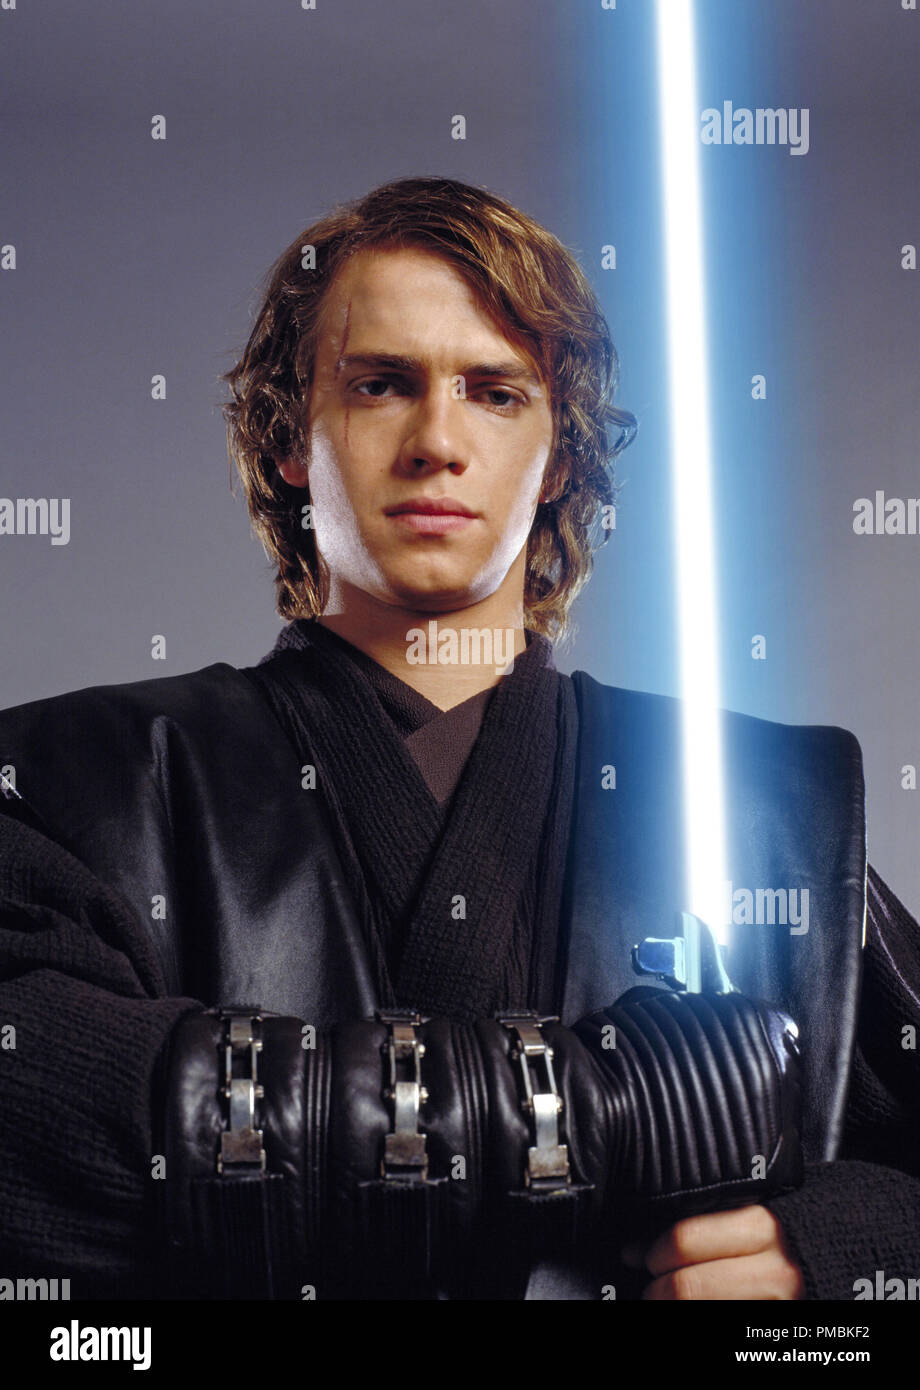 Hayden Christensen plays Anakin Skywalker, who is drawn to the dark side of the Force in Star Wars: Episode III Revenge of the Sith. TM & © 2005 Lucasfilm Ltd. All Rights Reserved. Stock Photo